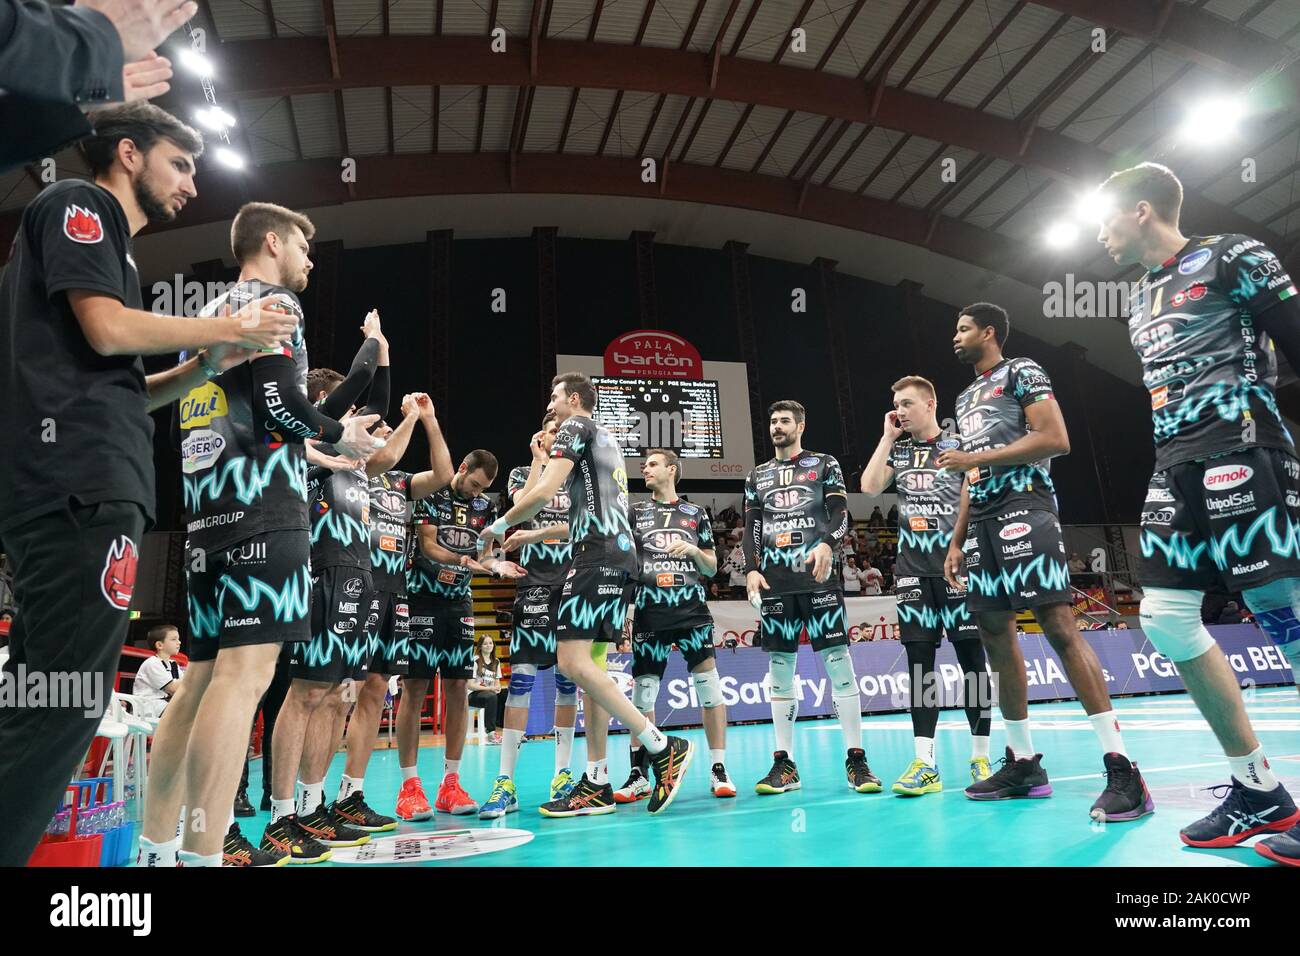 Perugia, Italy. 6th Jan, 2020. sir safety conad prepartitaduring Test Match  - Sir Safety Conad Perugia vs Skra Belchatow, Volleyball Test Match in  Perugia, Italy, January 06 2020 - LPS/Loris Cerquiglini Credit: